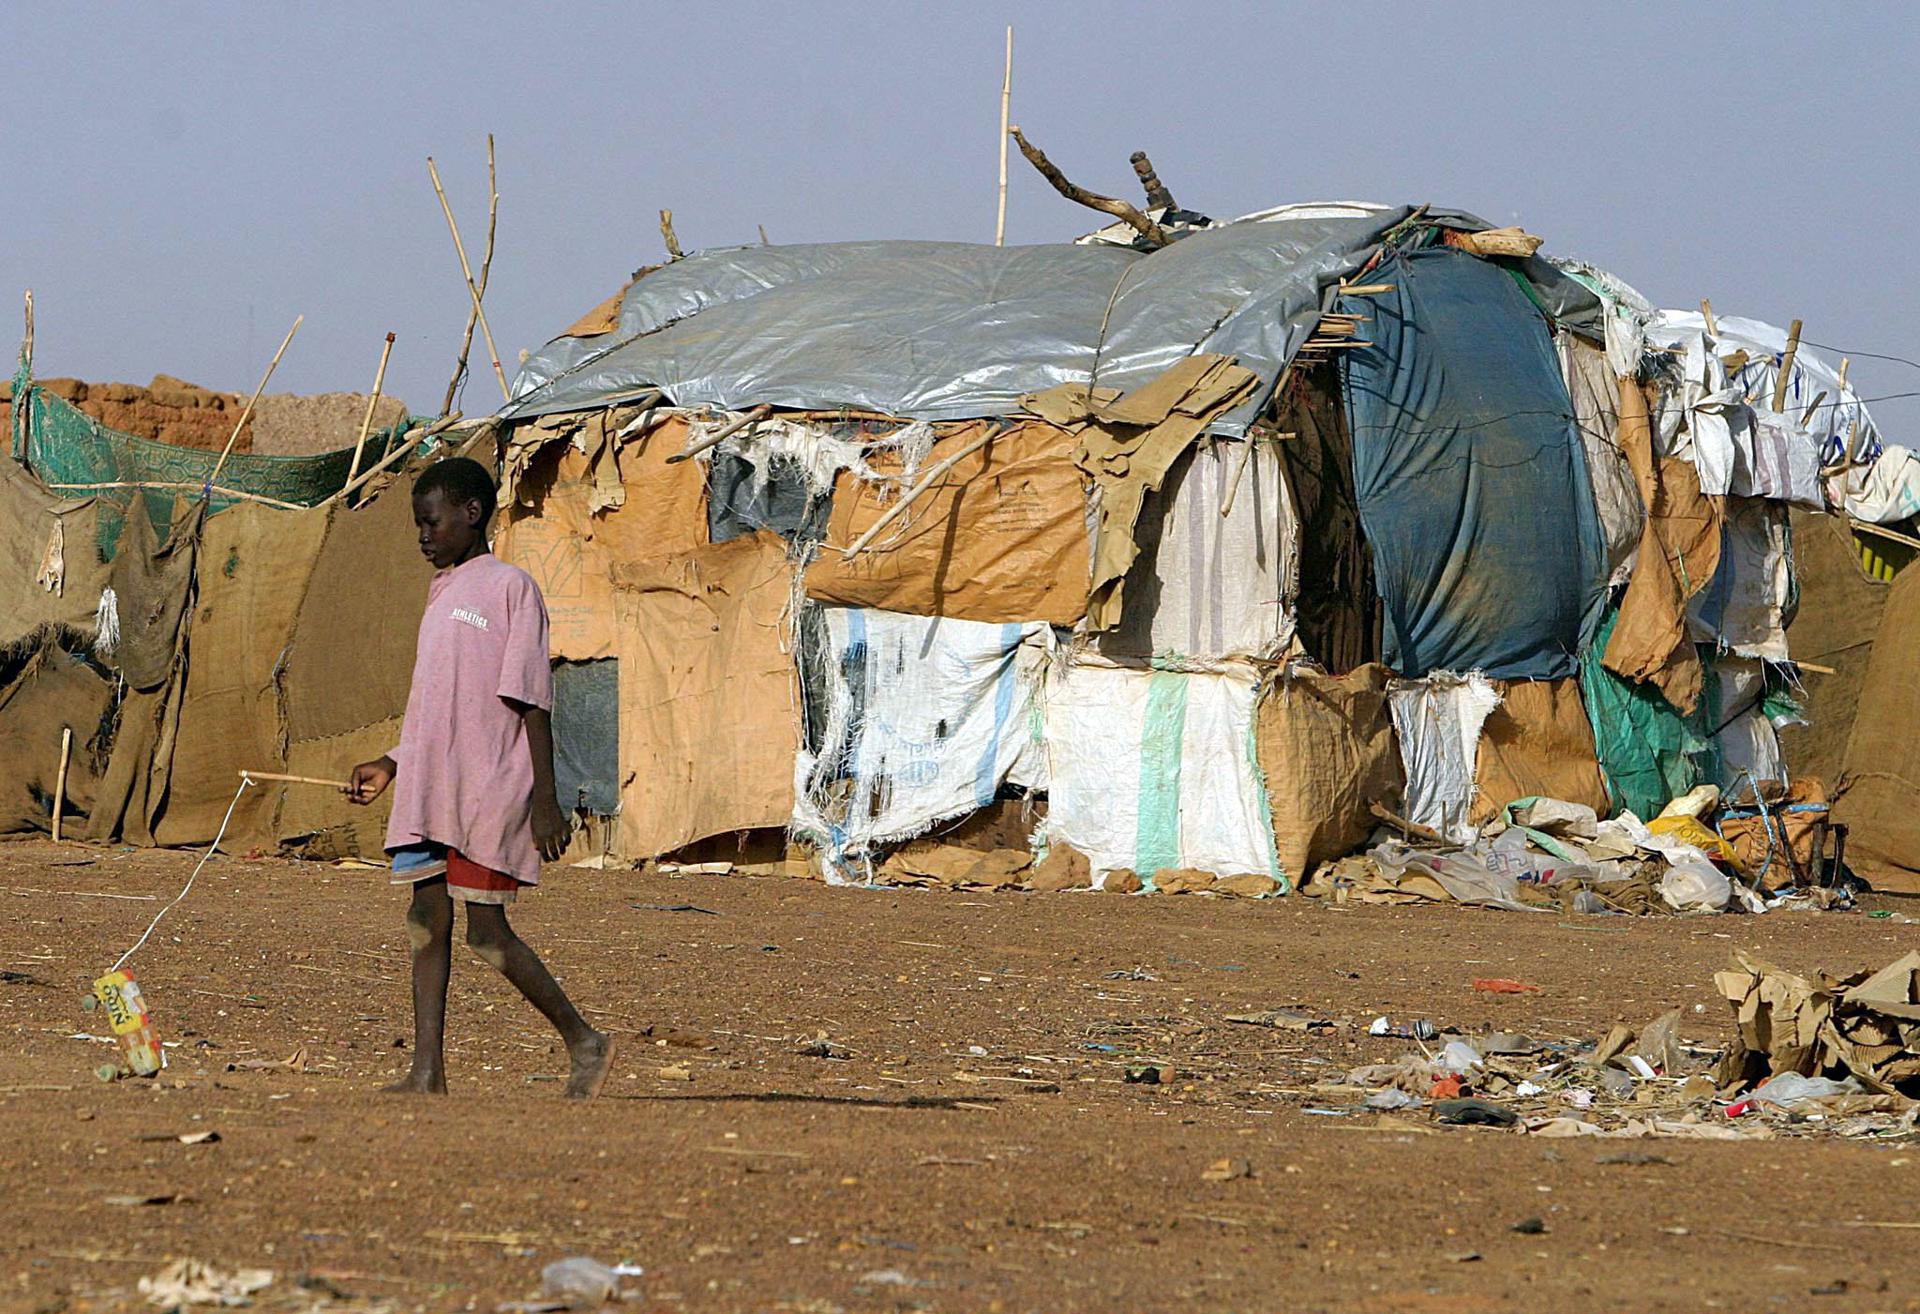 A Sudanese boy walks through the impoverished Wad el Bashier camp for internally displaced persons on the outskirts of Khartoum, Sudan Sunday 10 October 2004. EPA/FILE/NIC BOTHMA